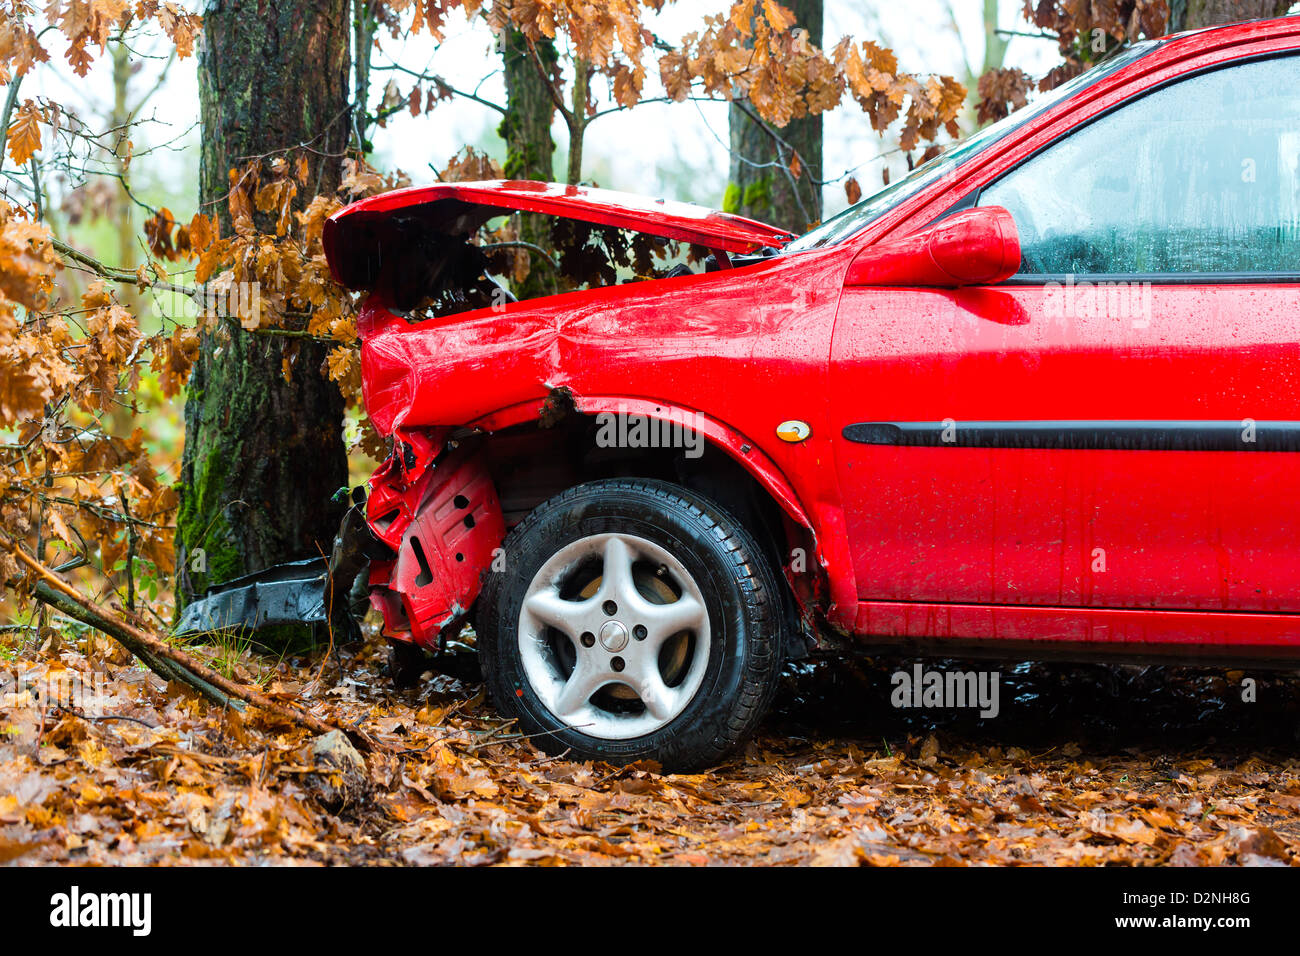 Accident - car crashed into tree, it is totally destroyed Stock Photo